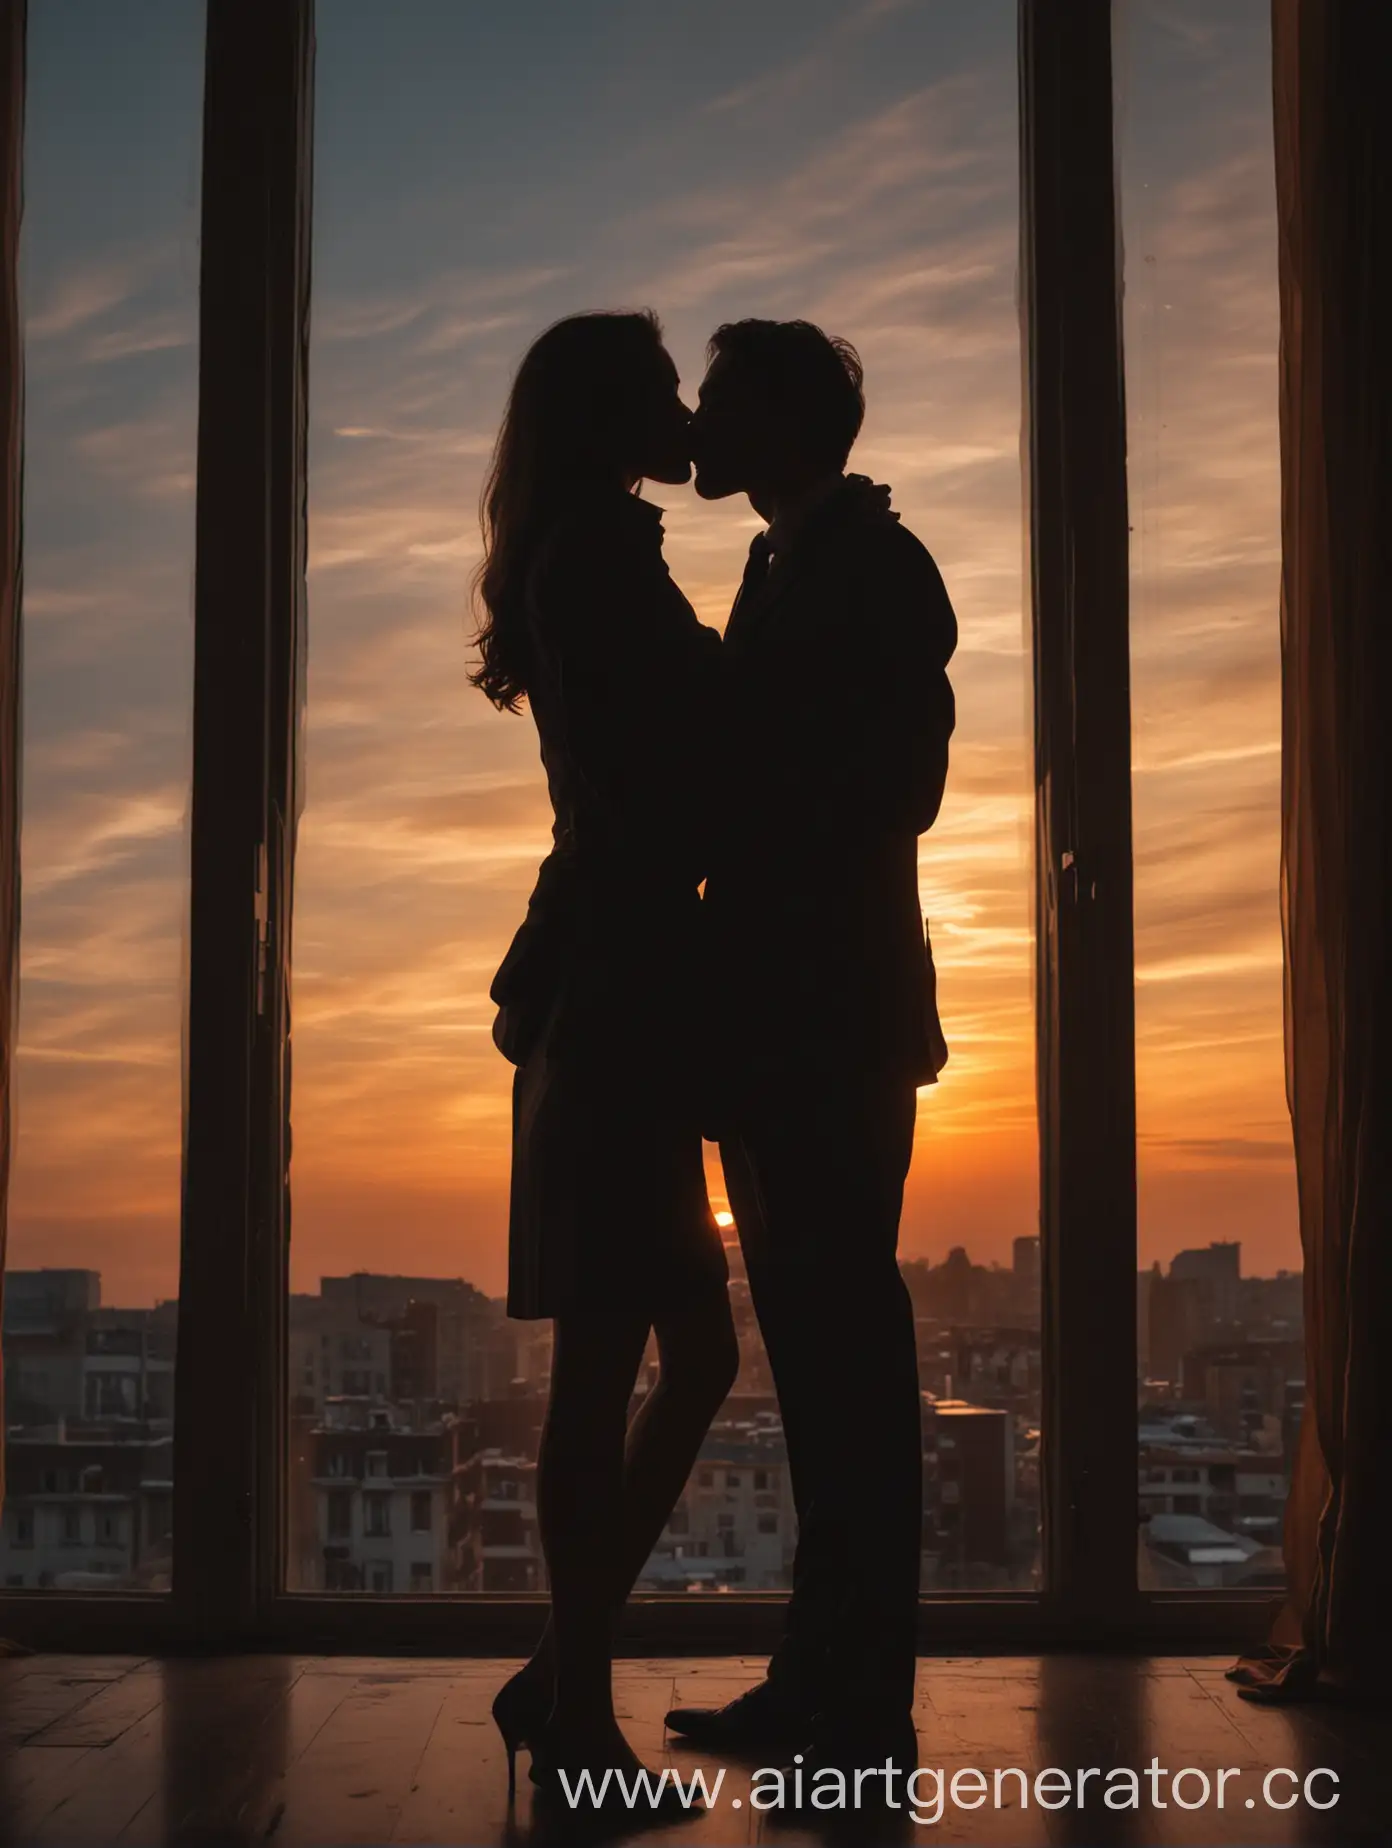 Passionate-Sunset-Kiss-Silhouette-of-Man-and-Woman-in-Love